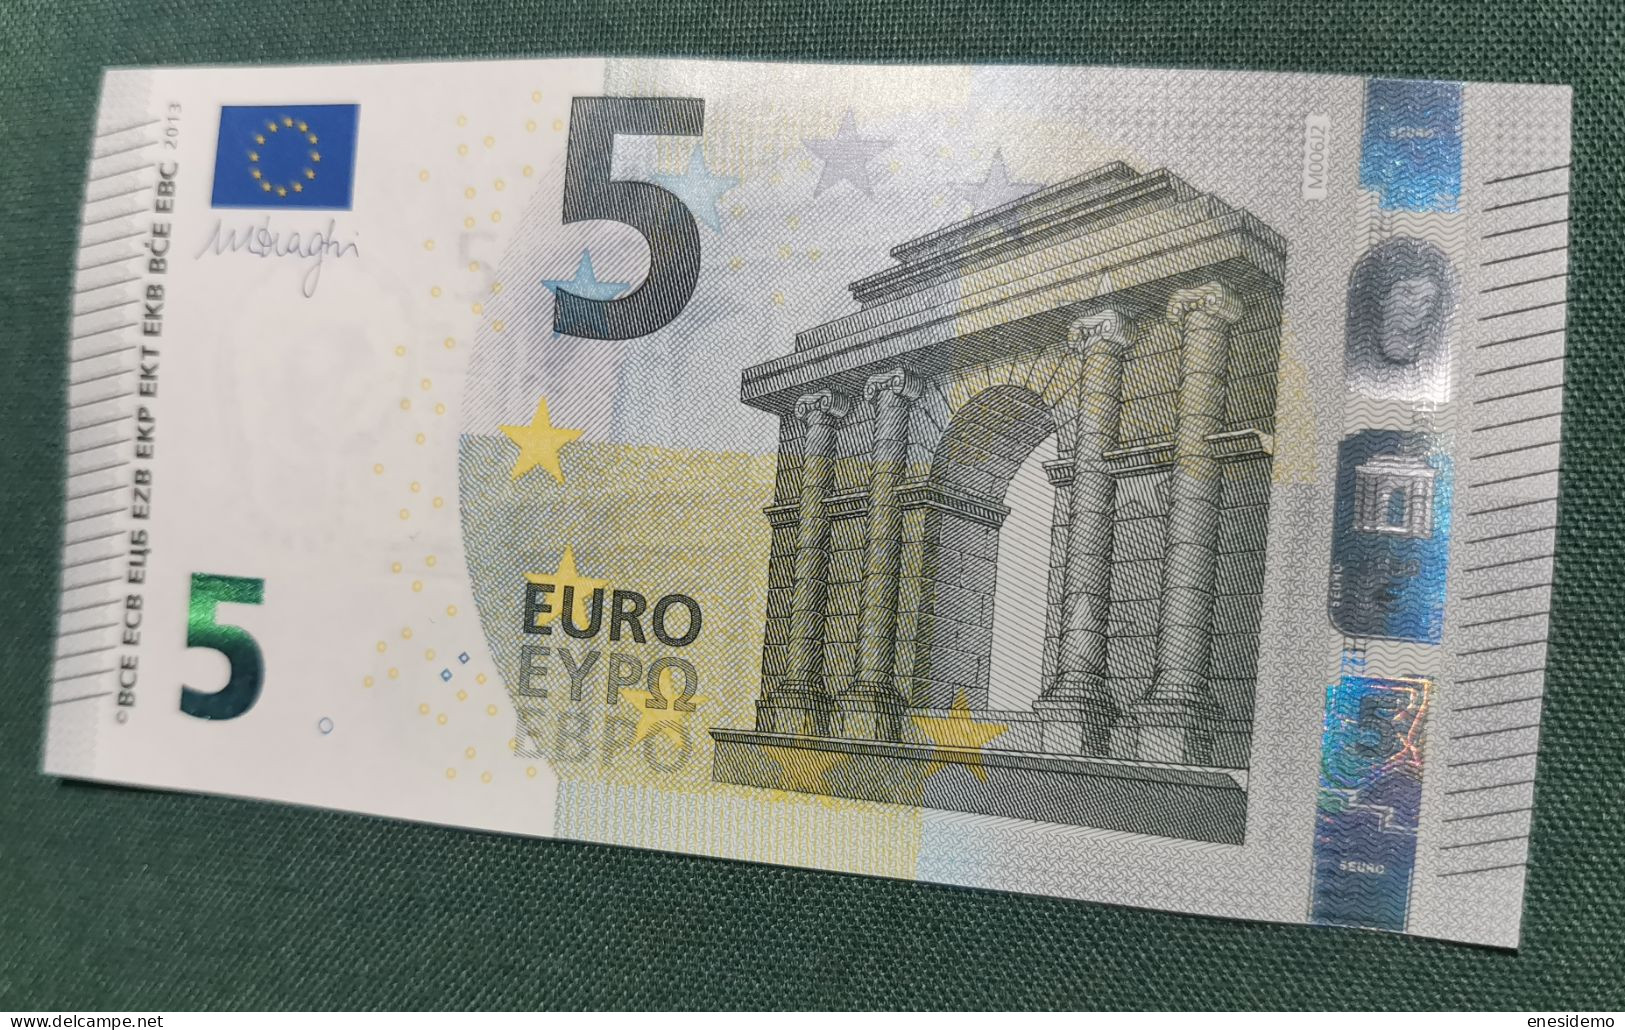 5 EURO PORTUGAL 2013 DRAGHI M006J2 MA NICE NUMBER FOUR CONSECUTIVE ZEROS SC FDS UNC. PERFECT